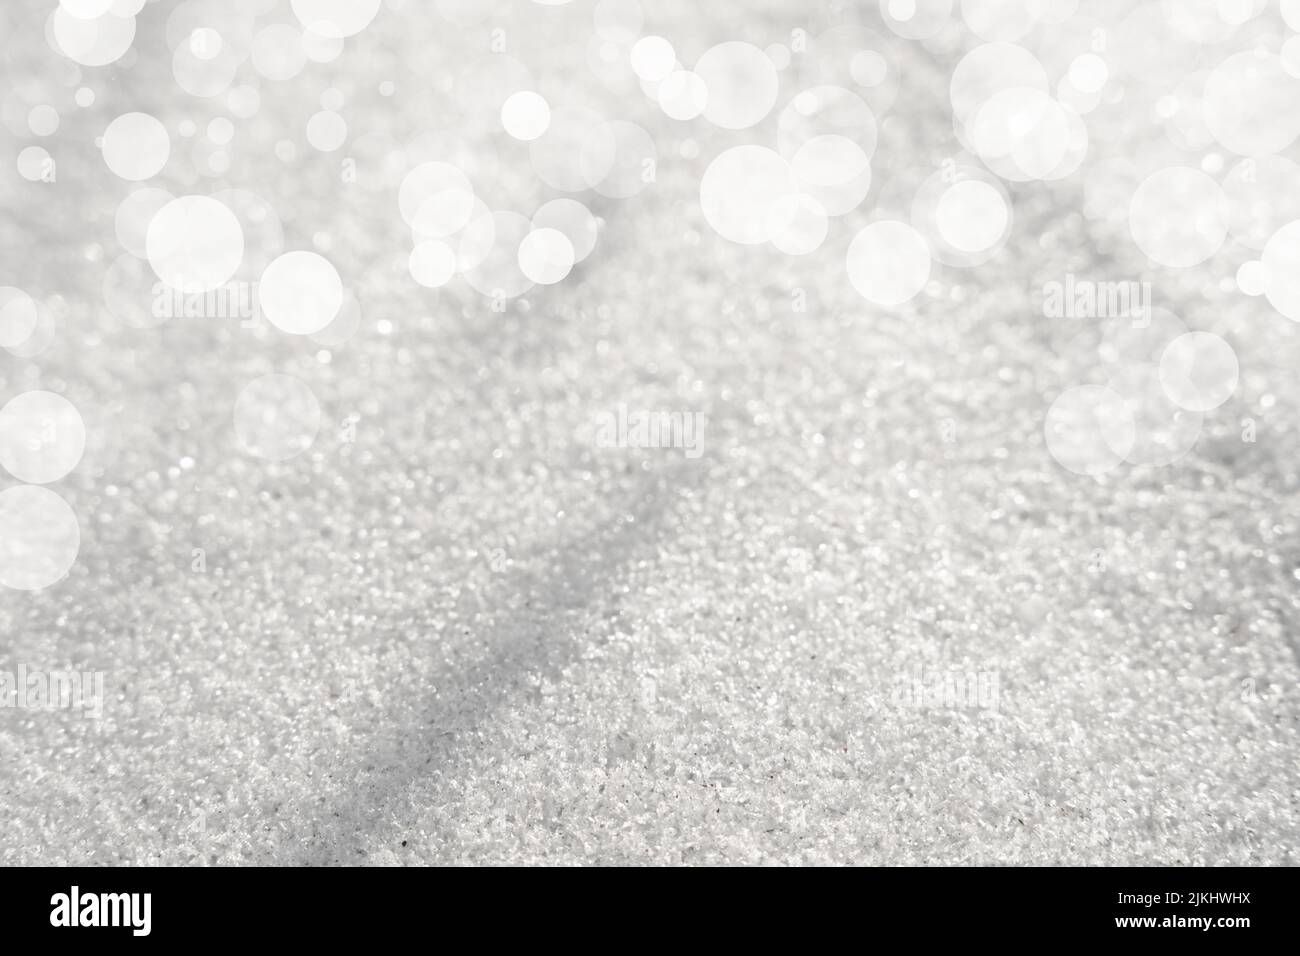 A white snow texture background with blurred bokeh circles above Stock Photo